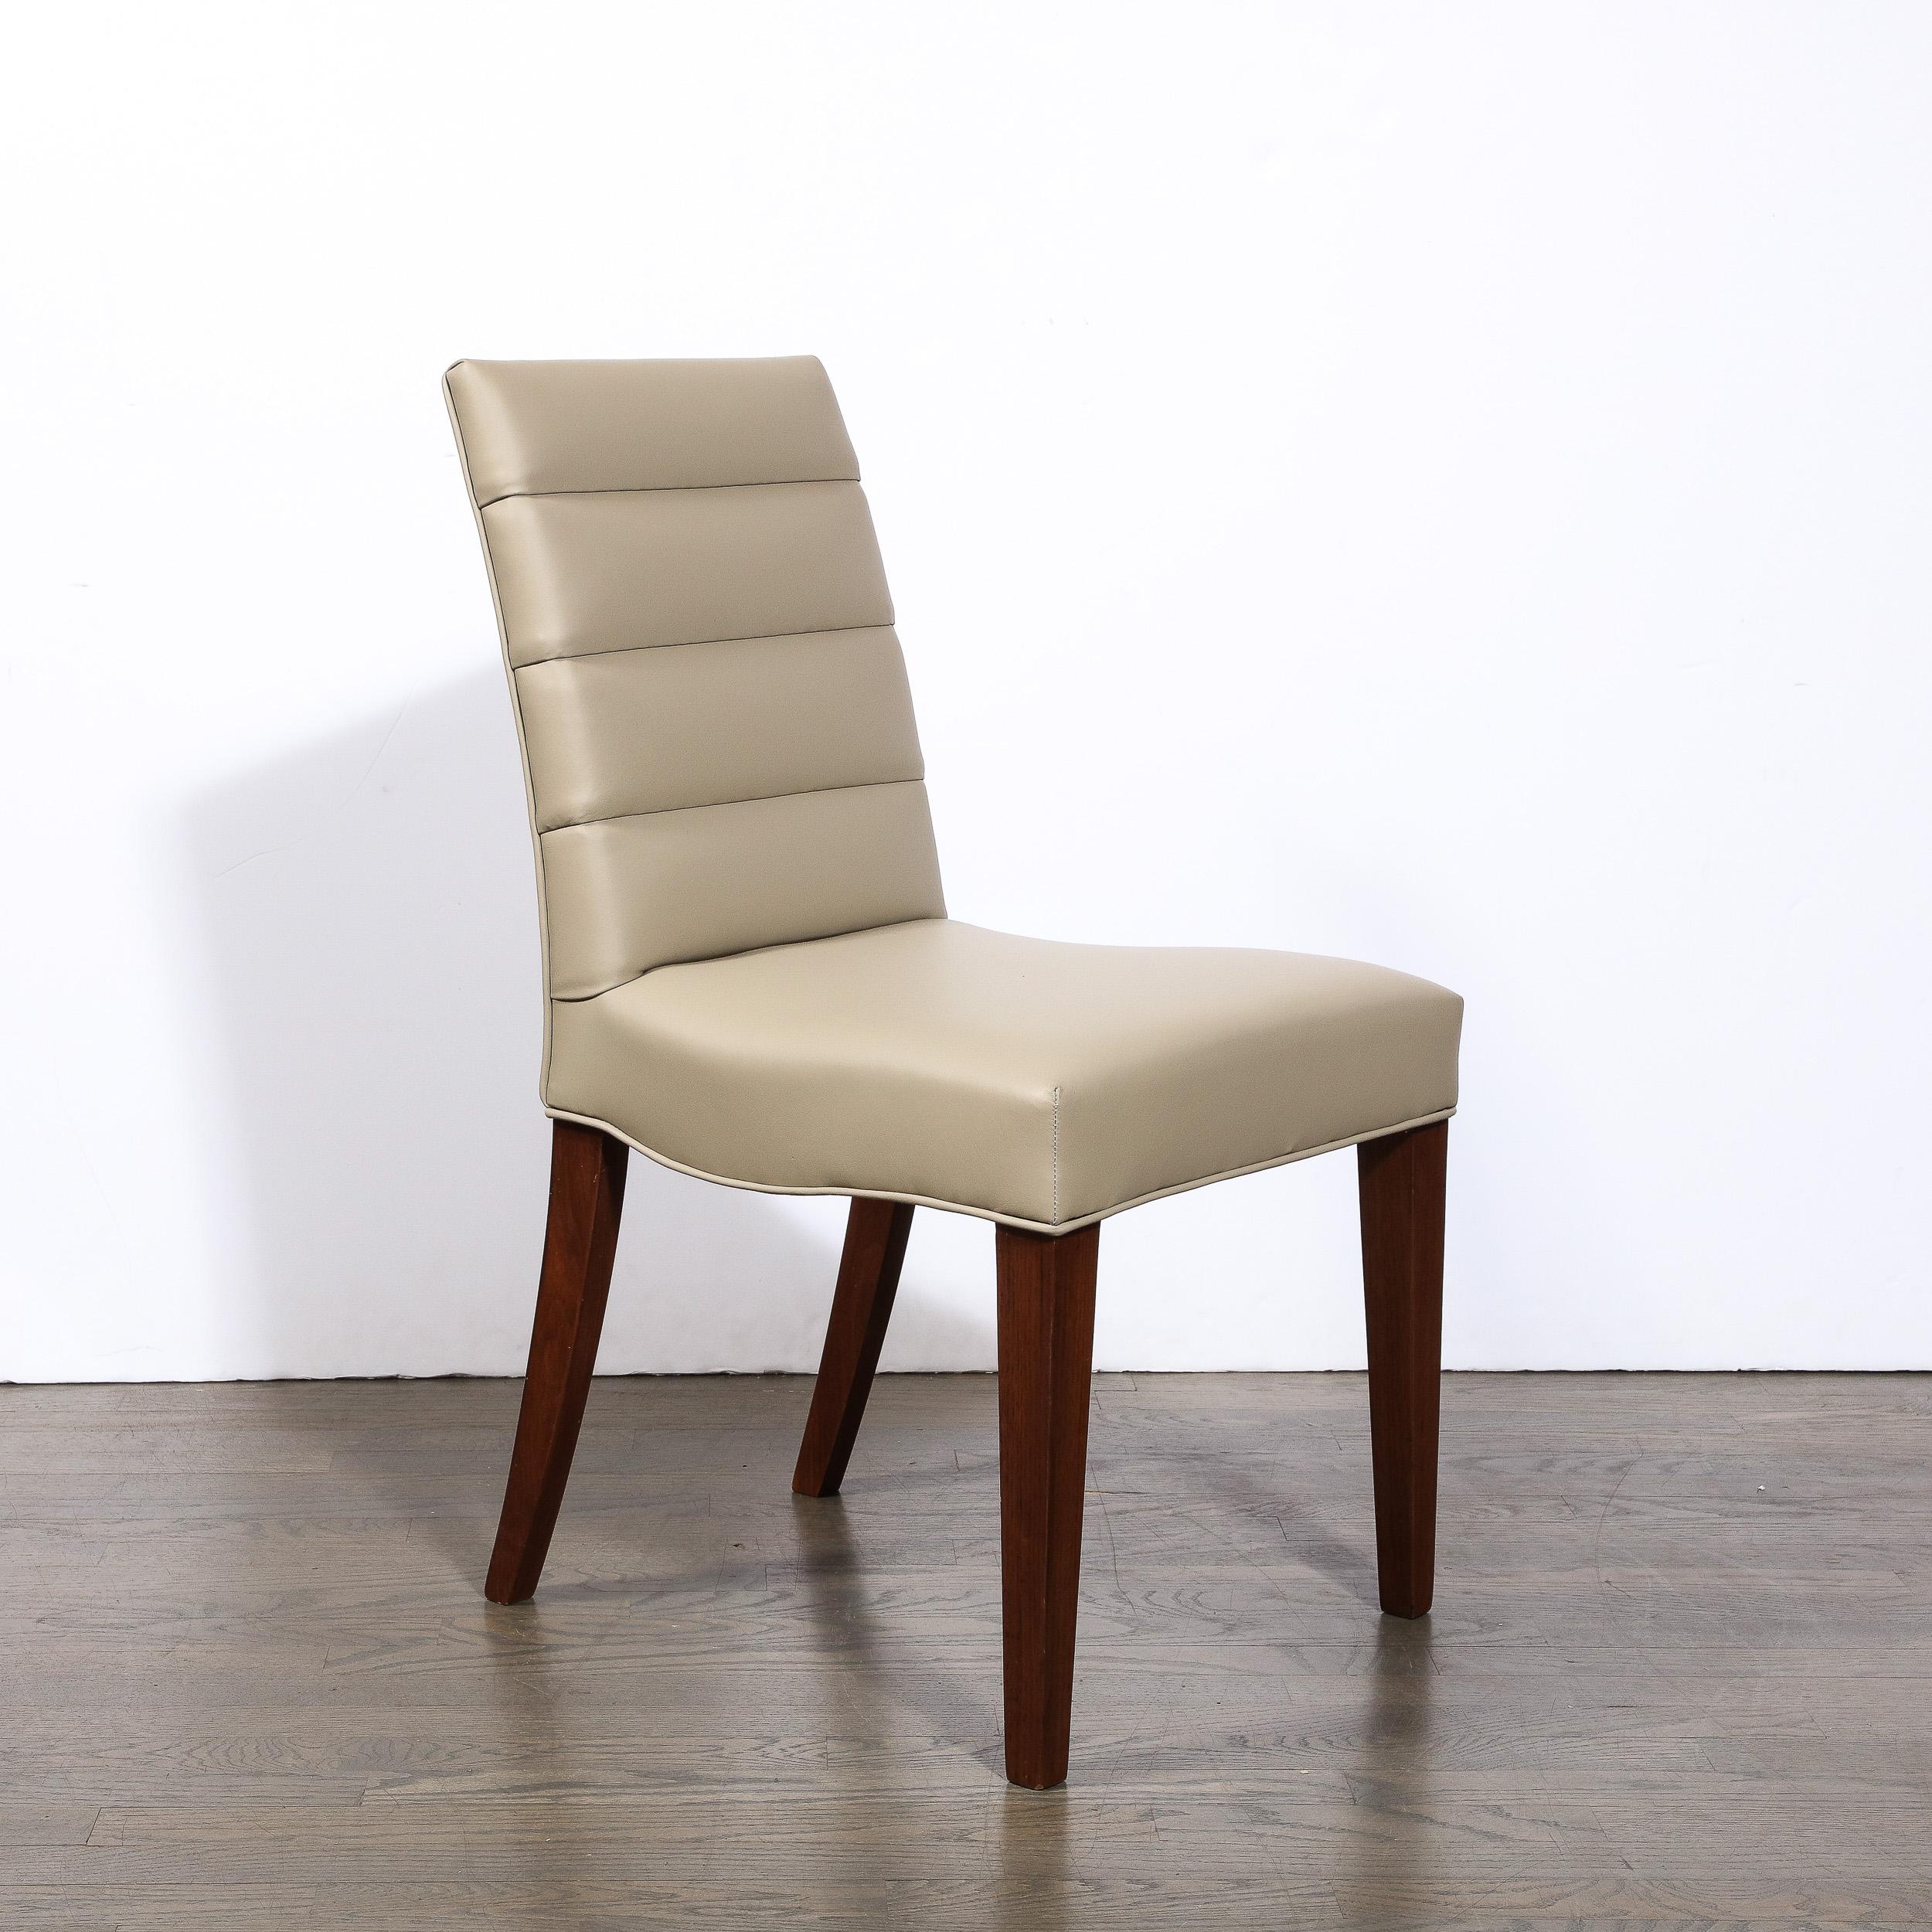 Art Deco Gilbert Rohde Chair in Holly Hunt Leather w/ Tufted Back & Walnut Legs For Sale 6